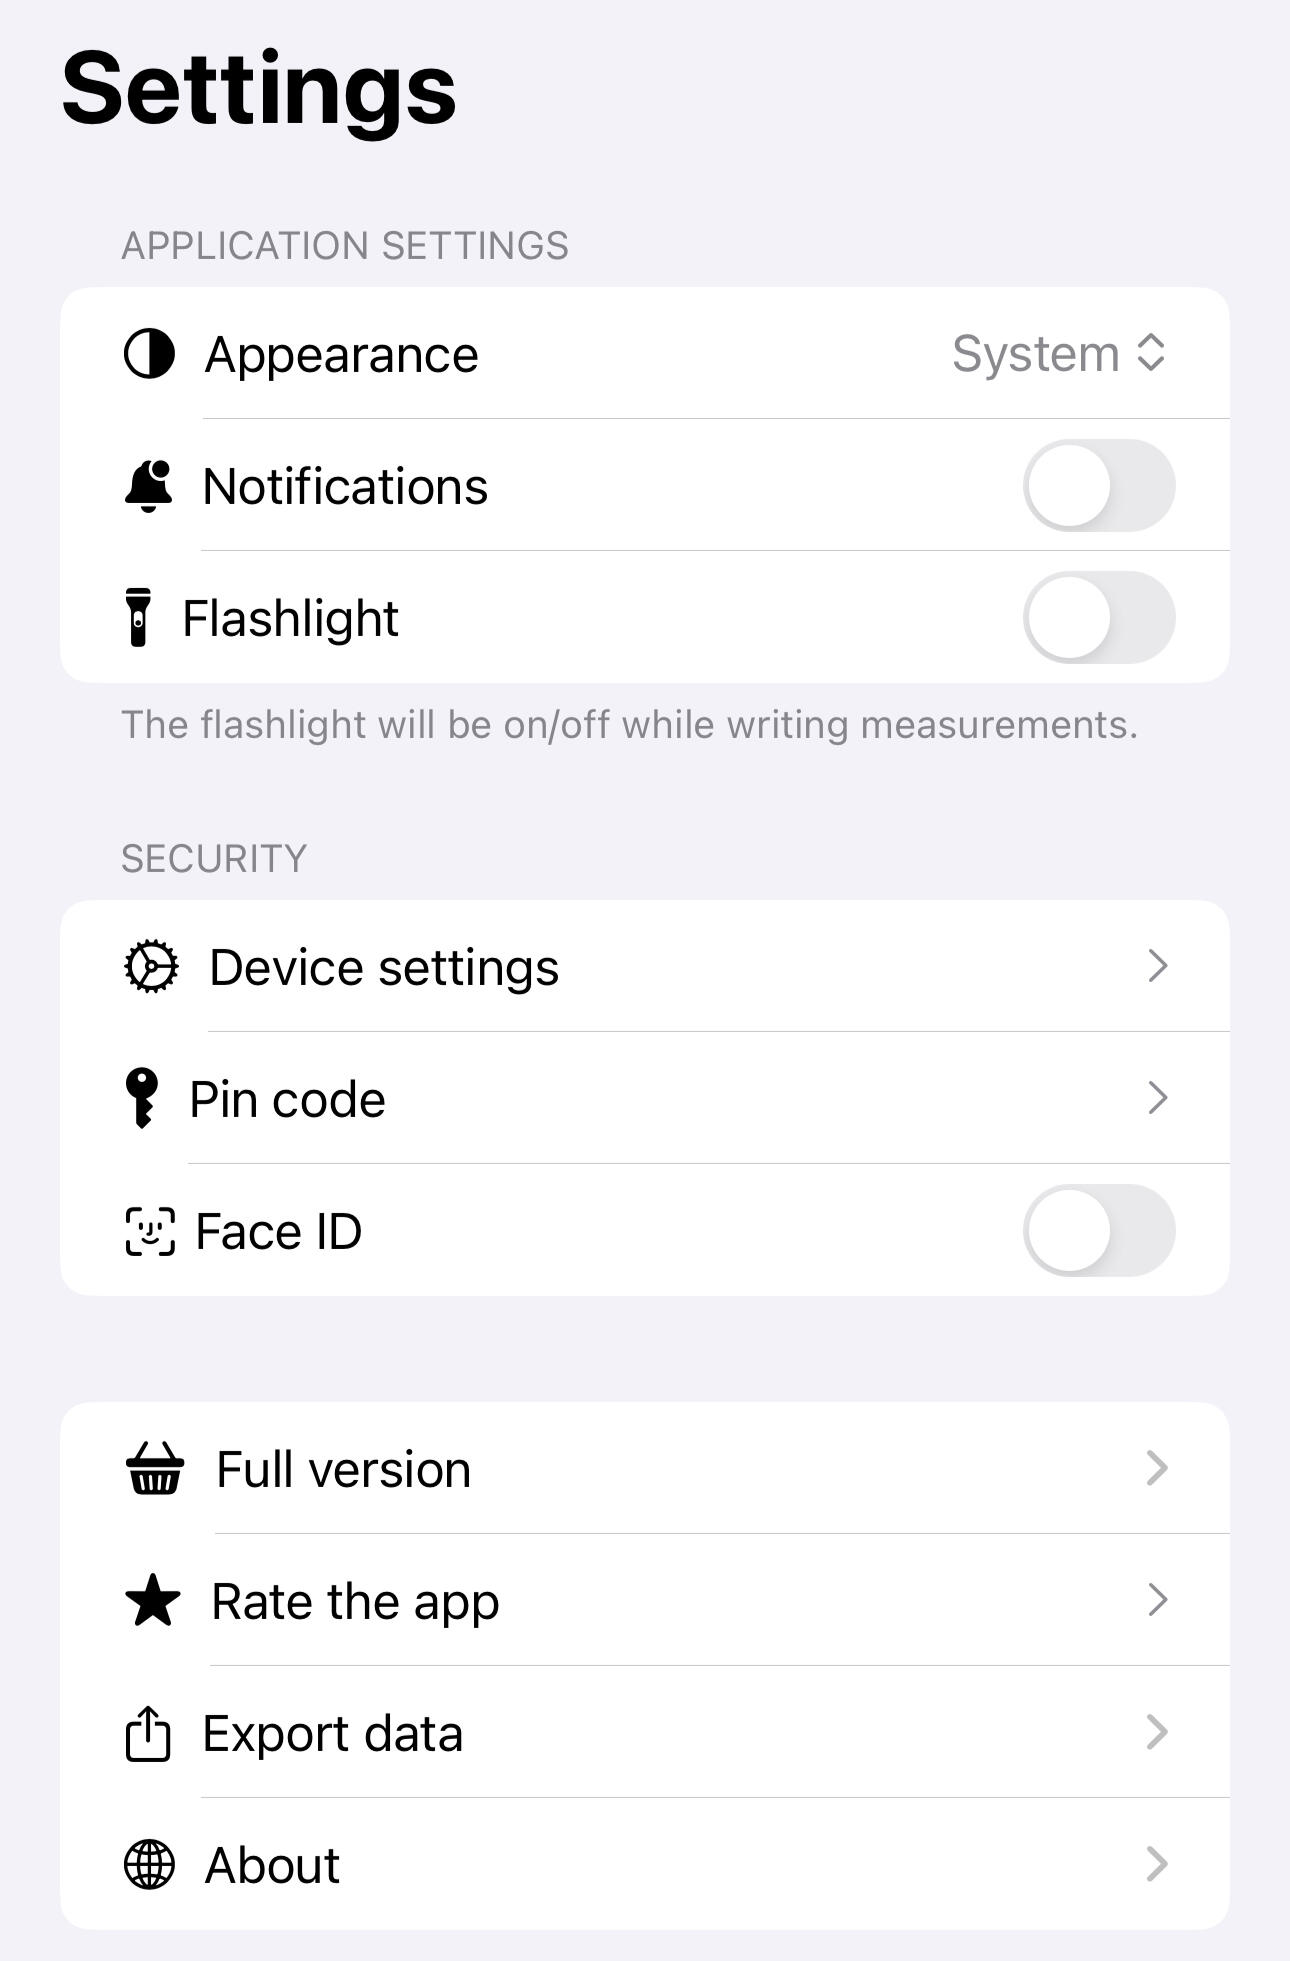 Flexible notifications settings and security